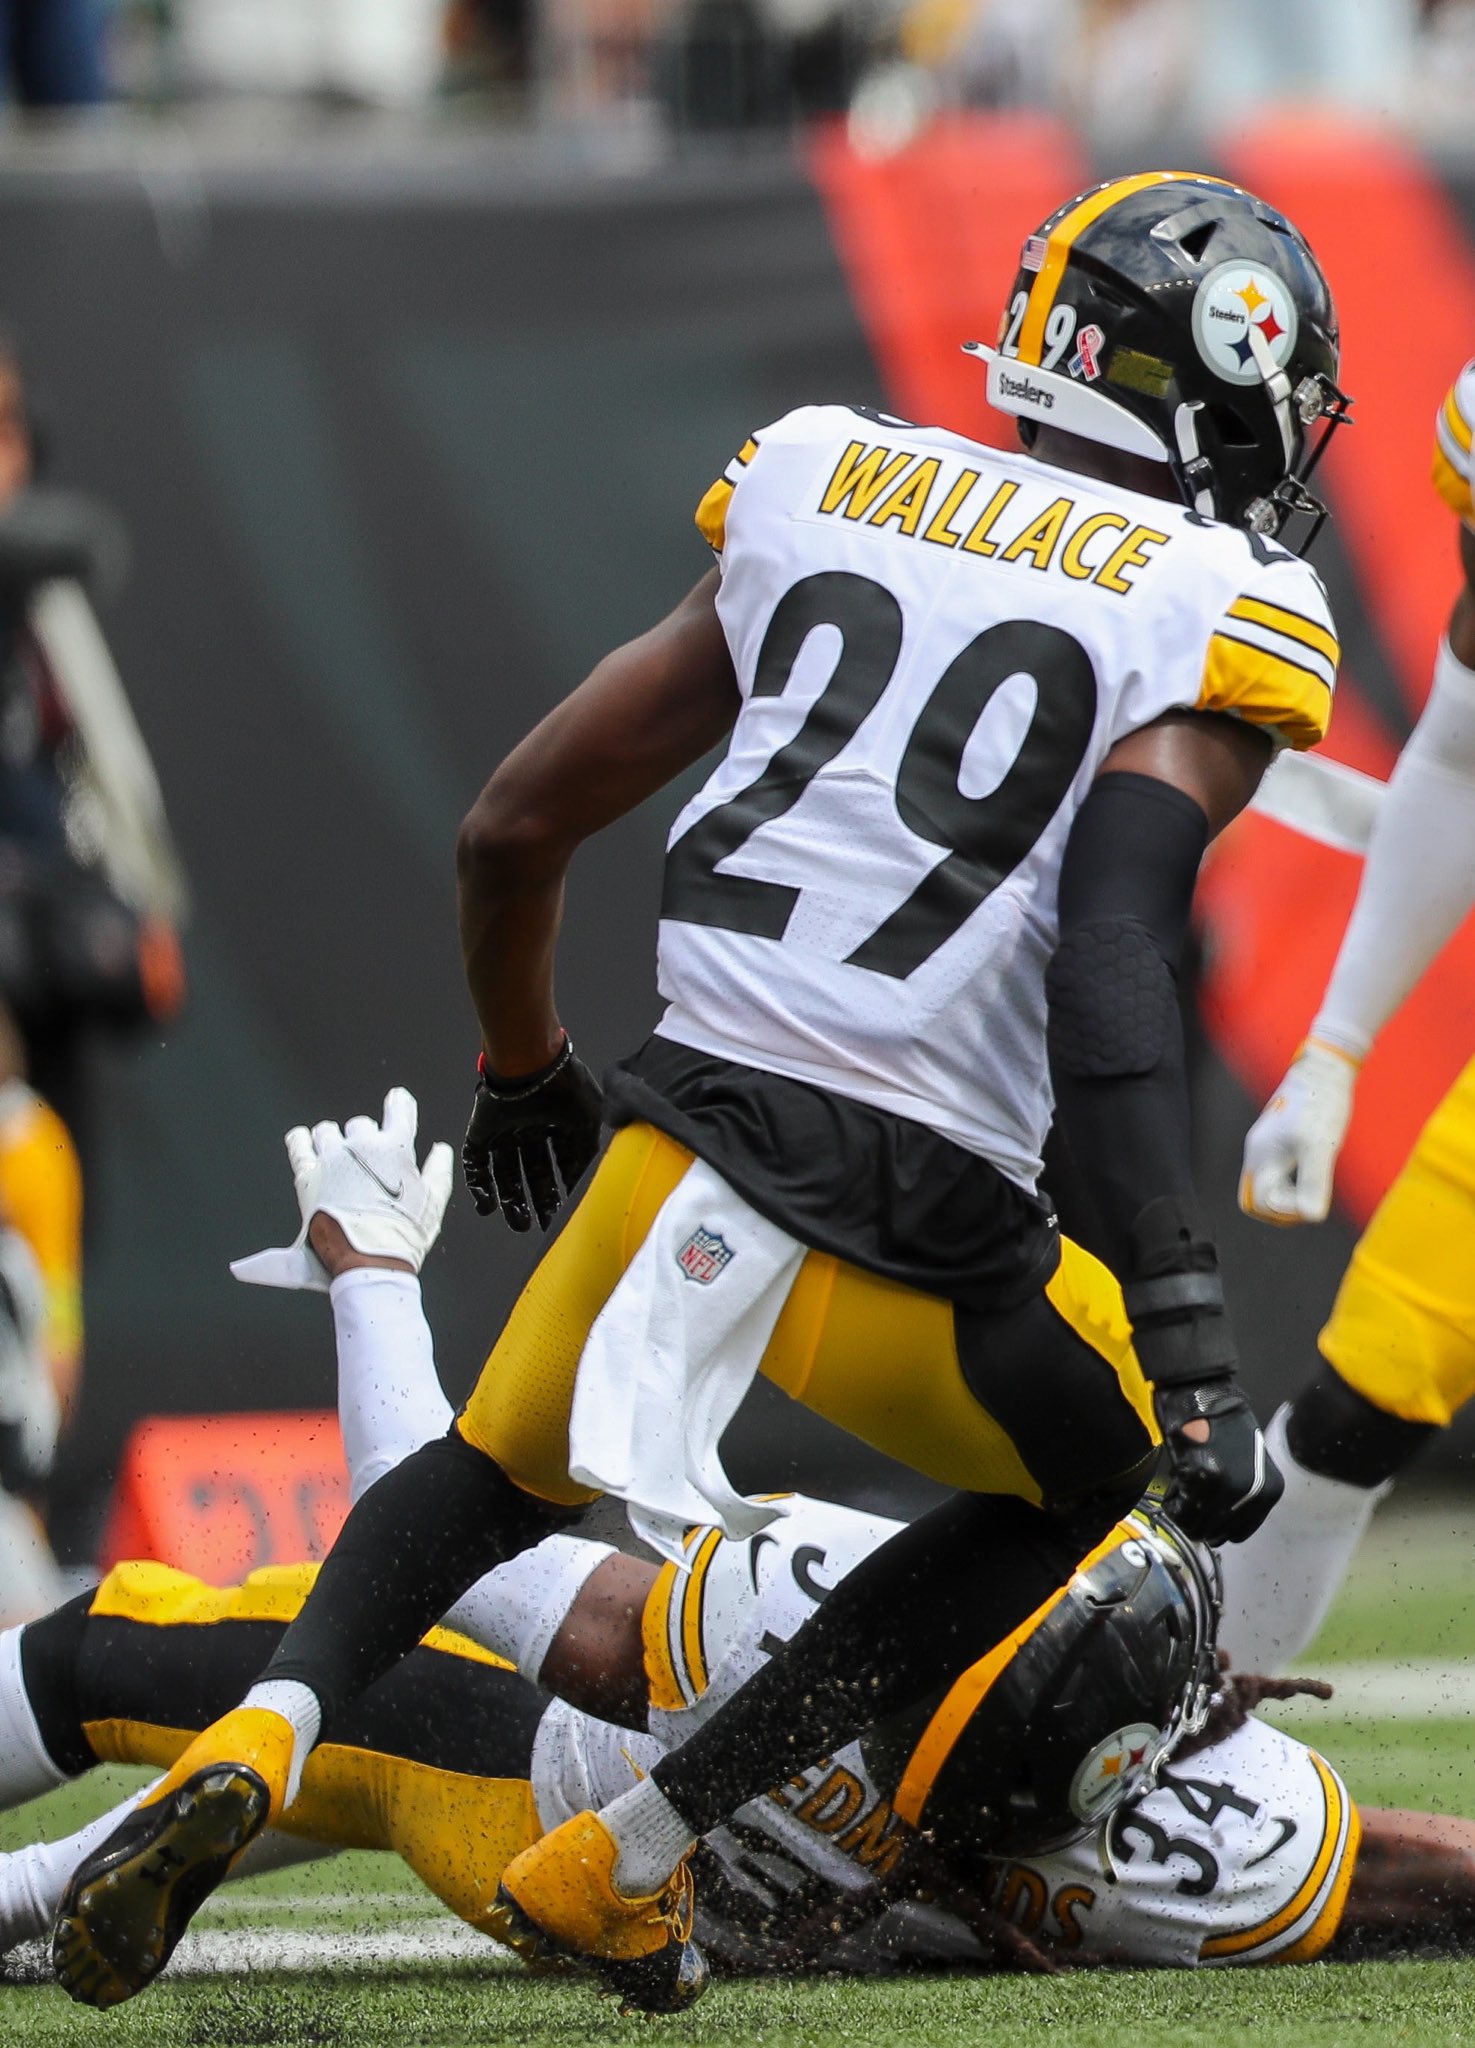 PFF PIT Steelers on Twitter: "Levi Wallace against the Browns in Week 3: ♦️ 33 snaps played 8 receiving yards allowed 🔹 passer rating allowed https://t.co/U5O0sRvNIh" / Twitter